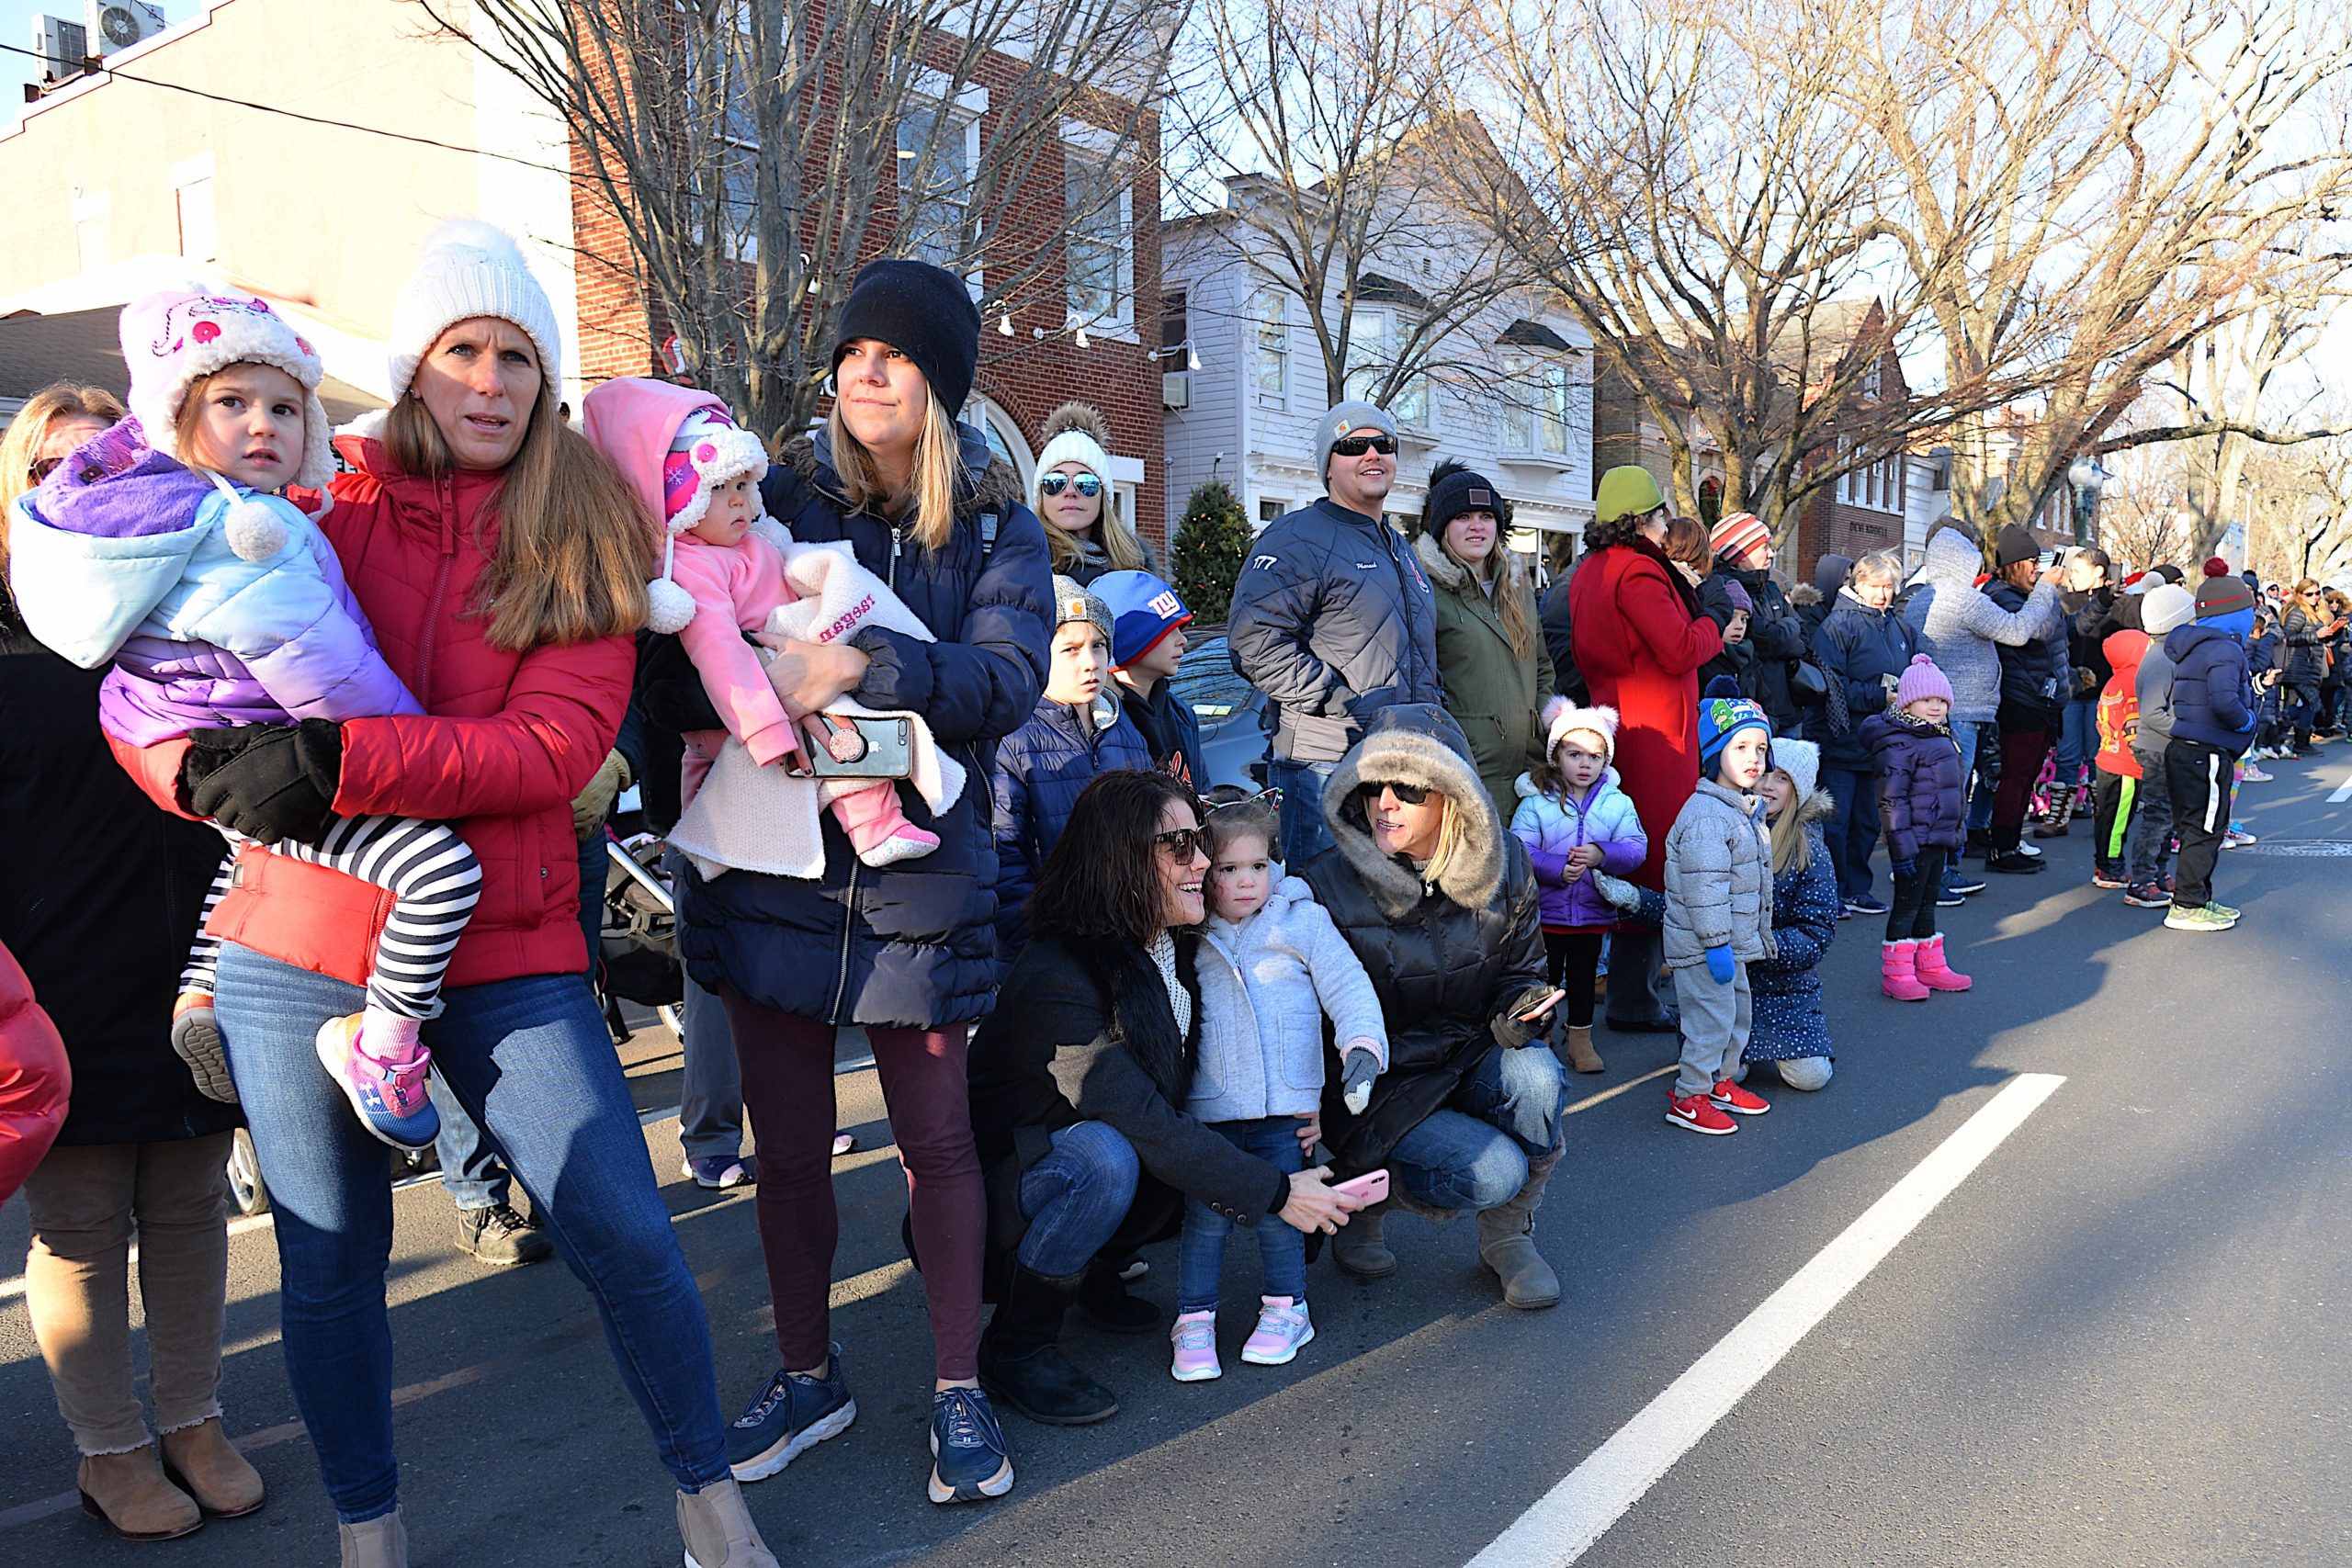 The holiday spirit was on full display Saturday afternoon as the annual Santa parade made its way through East Hampton's Main Street. KYRIL BROMLEY